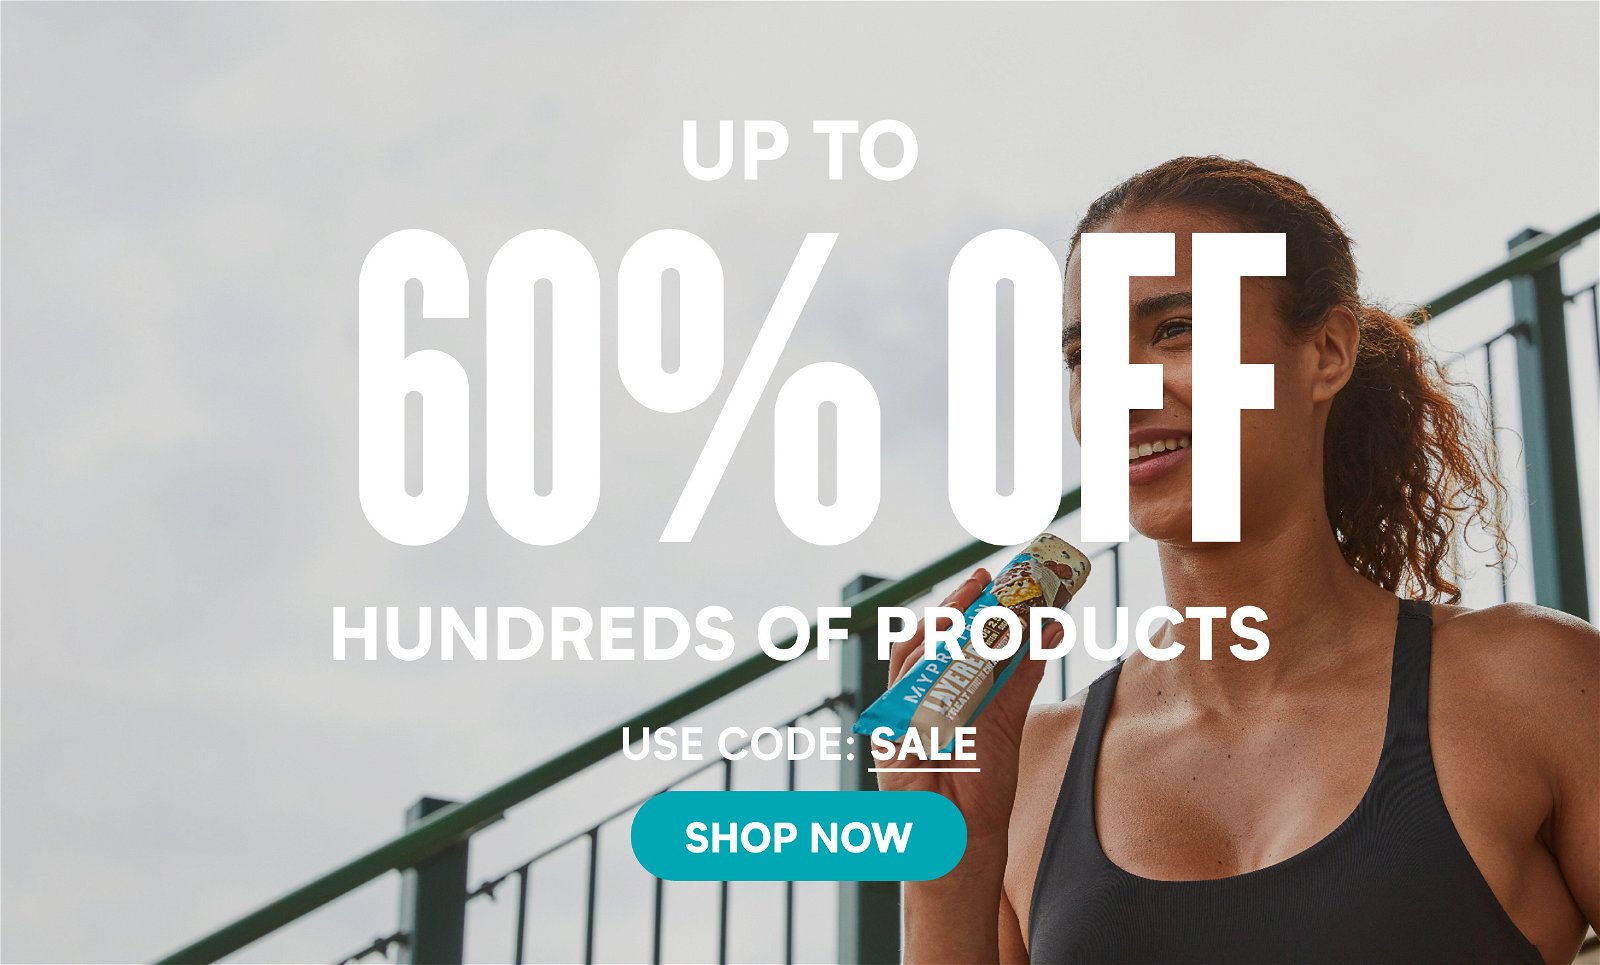 Up to 60% off hundreds of products